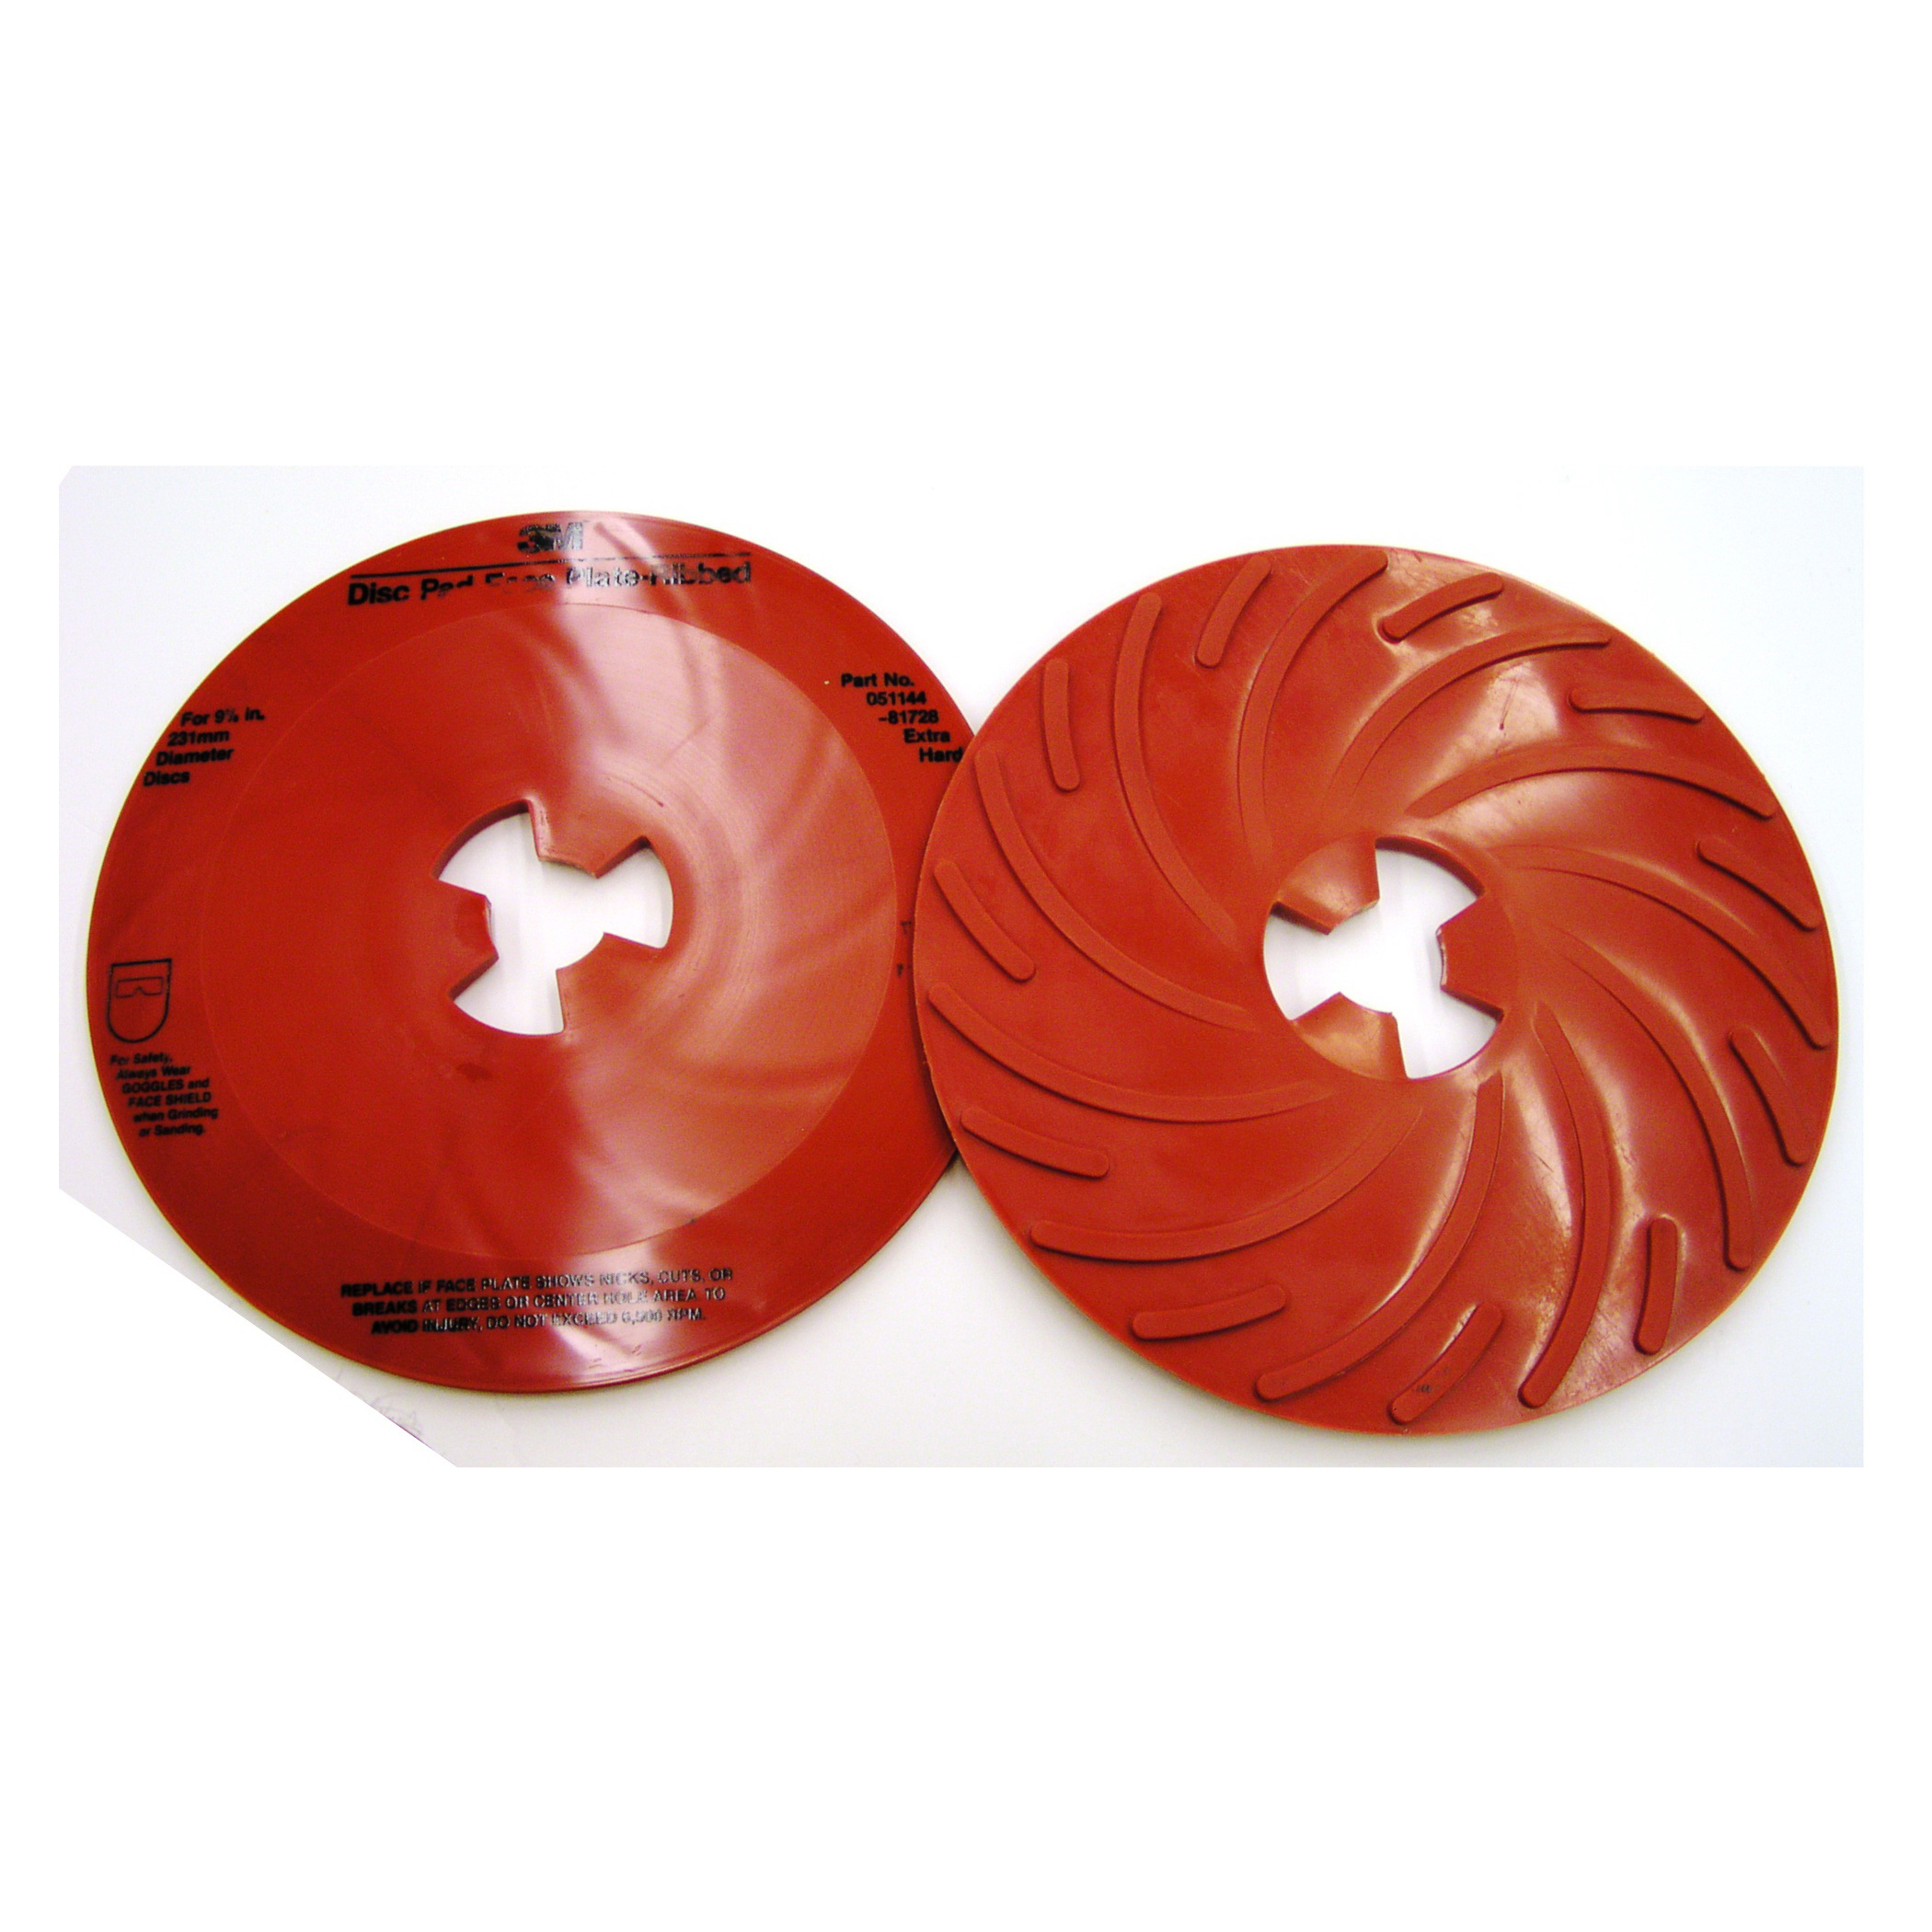 3M™ 051144-81728 Extra Hard Density Ribbed Close Coated Abrasive Disc, 9 in W/Dia, For Use With 3M™Disc Pad Hub, Right Angle Grinder and Rotary Sander